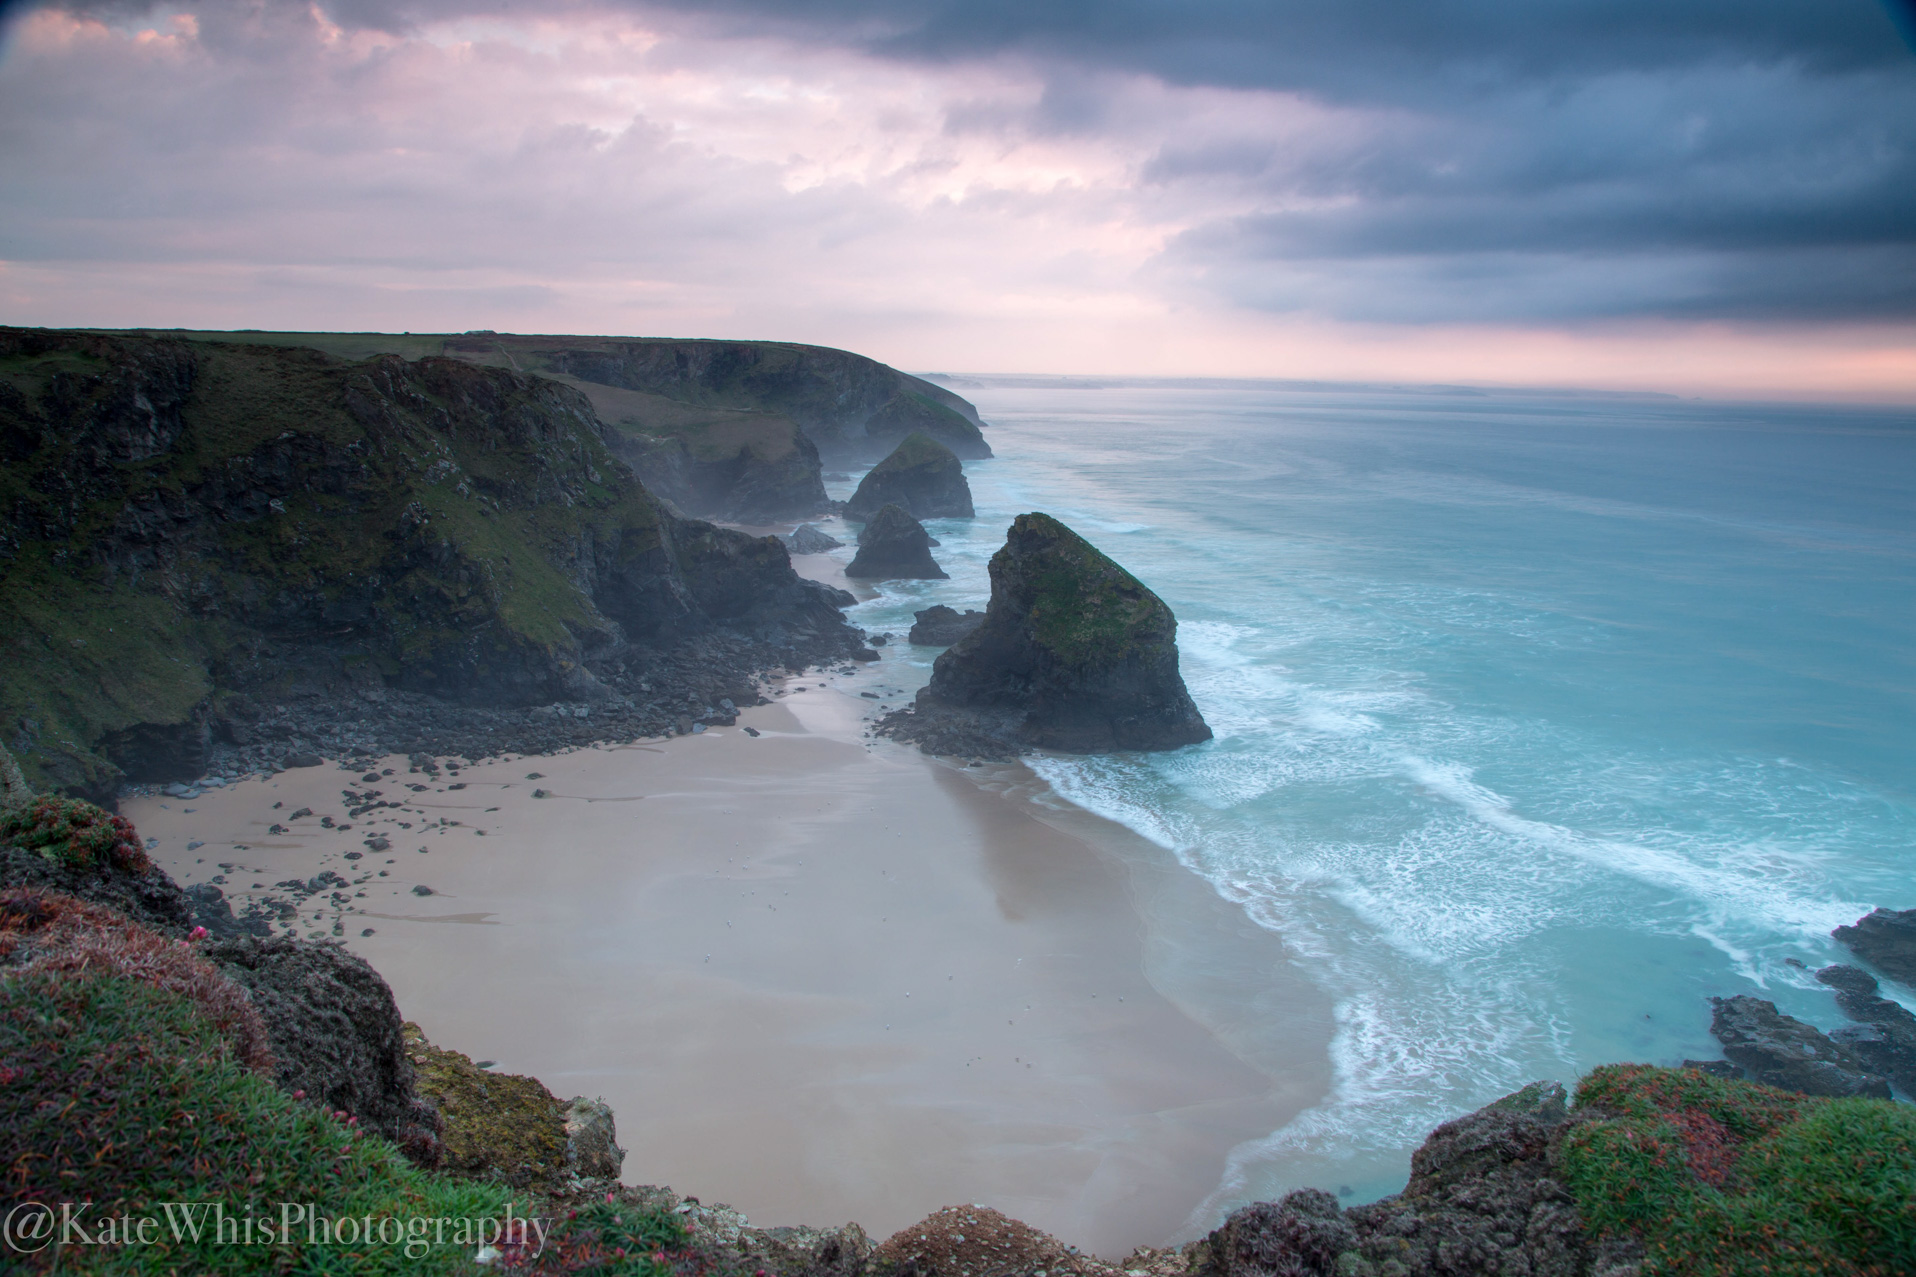 View of Bedruthan Steps, Cornwall at sunset